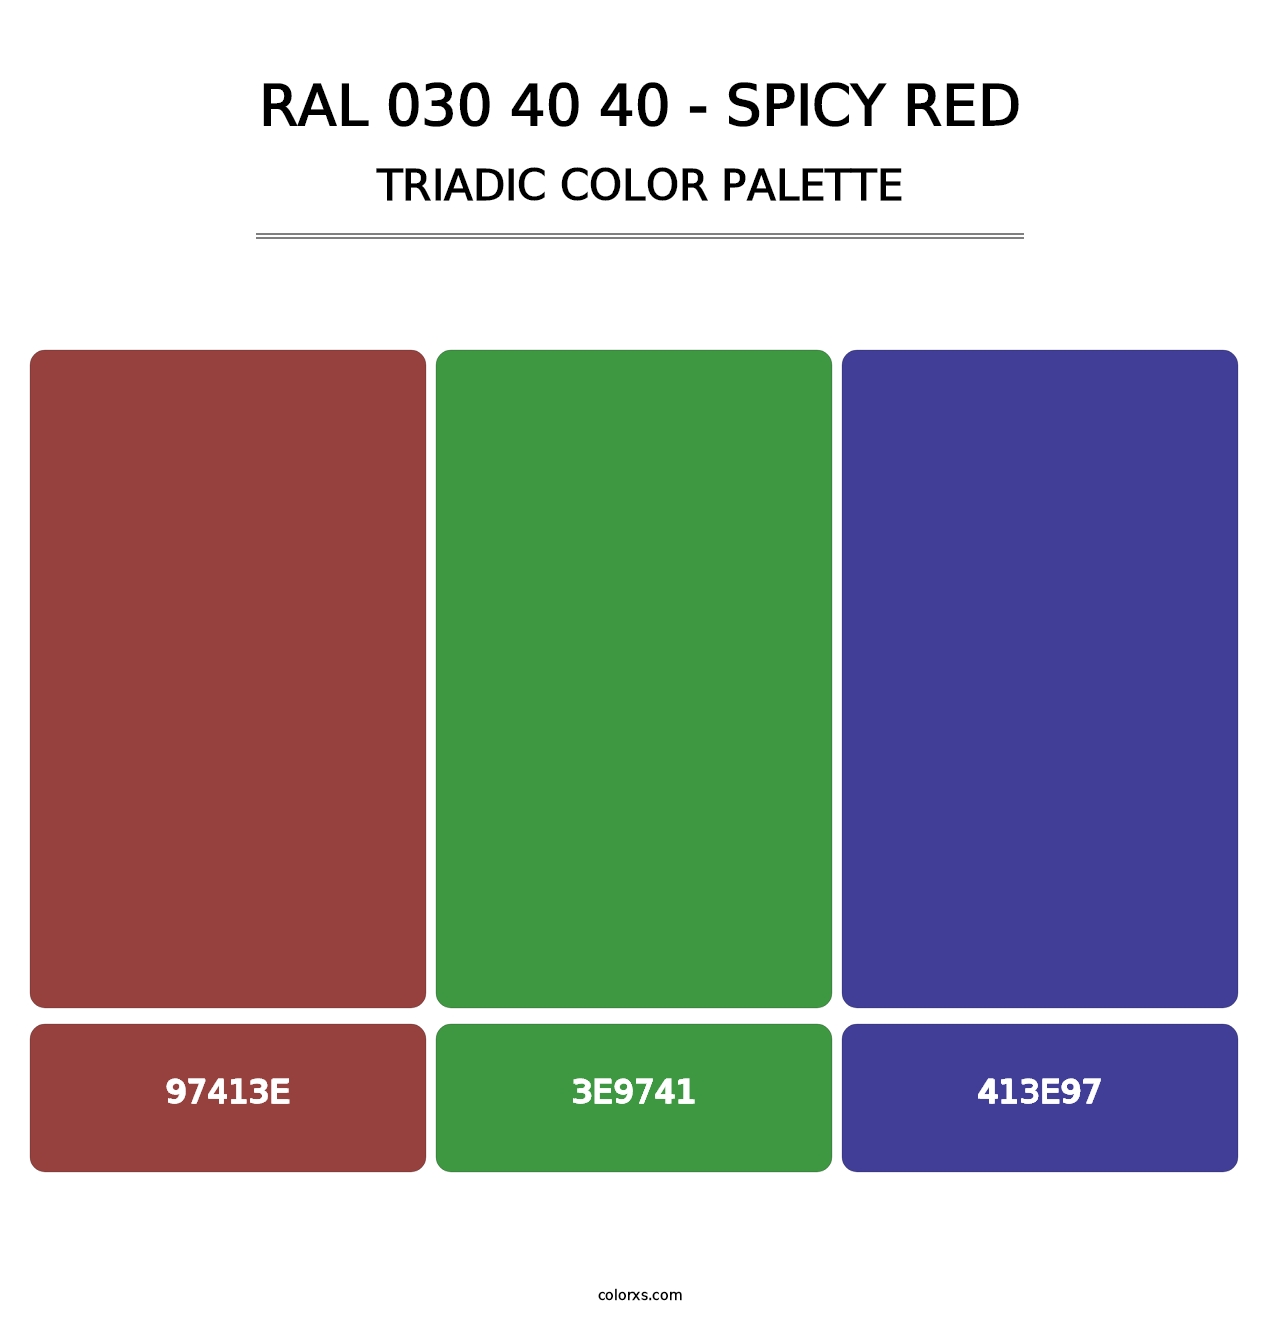 RAL 030 40 40 - Spicy Red - Triadic Color Palette